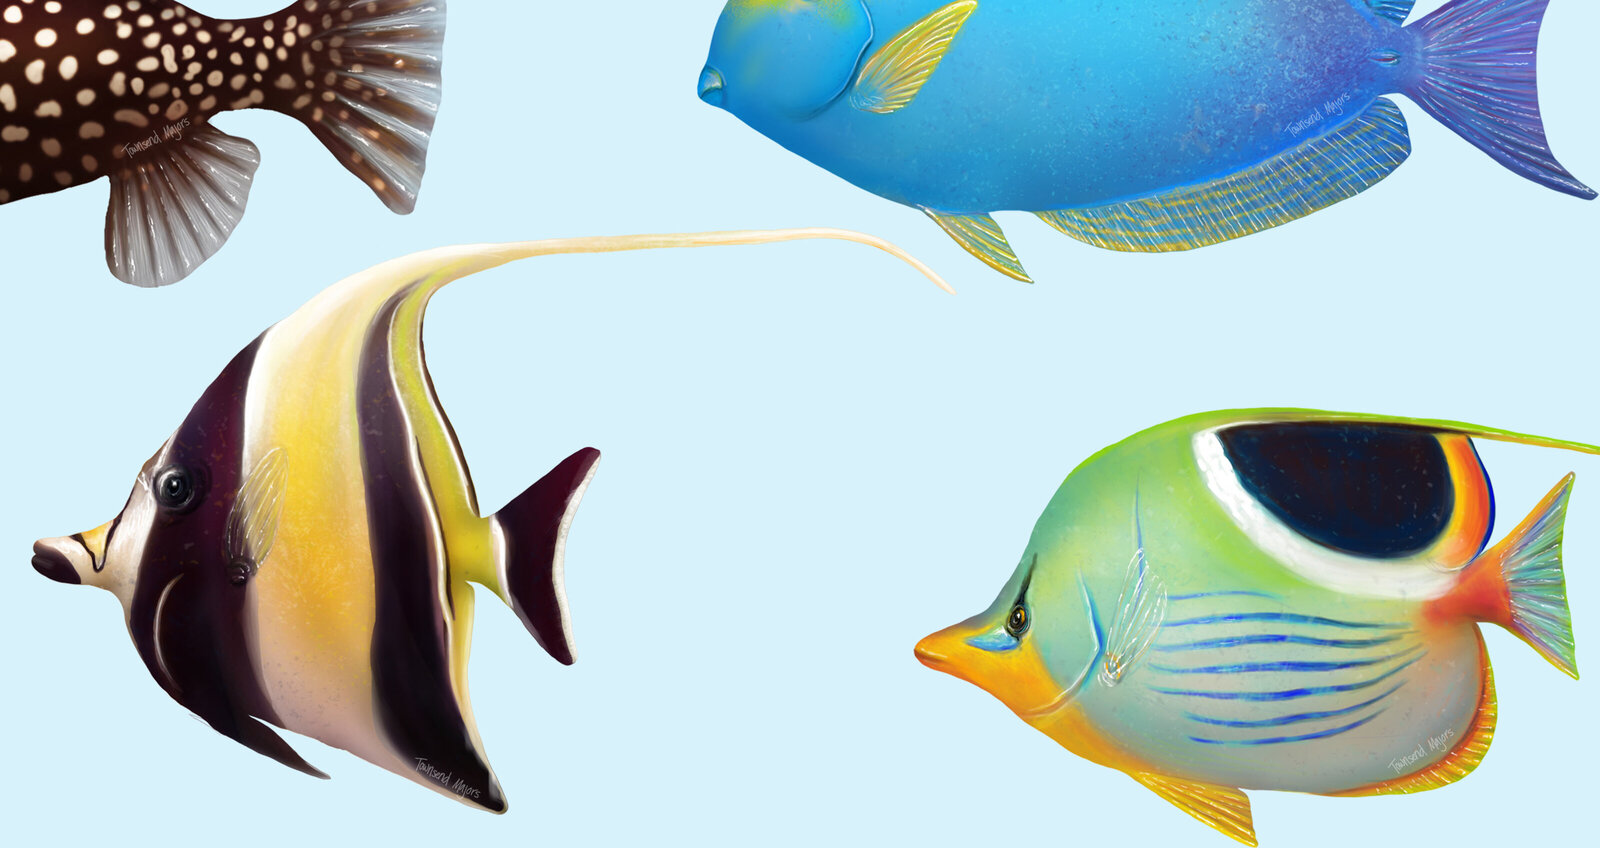 Townsend's reef fish illustration close up